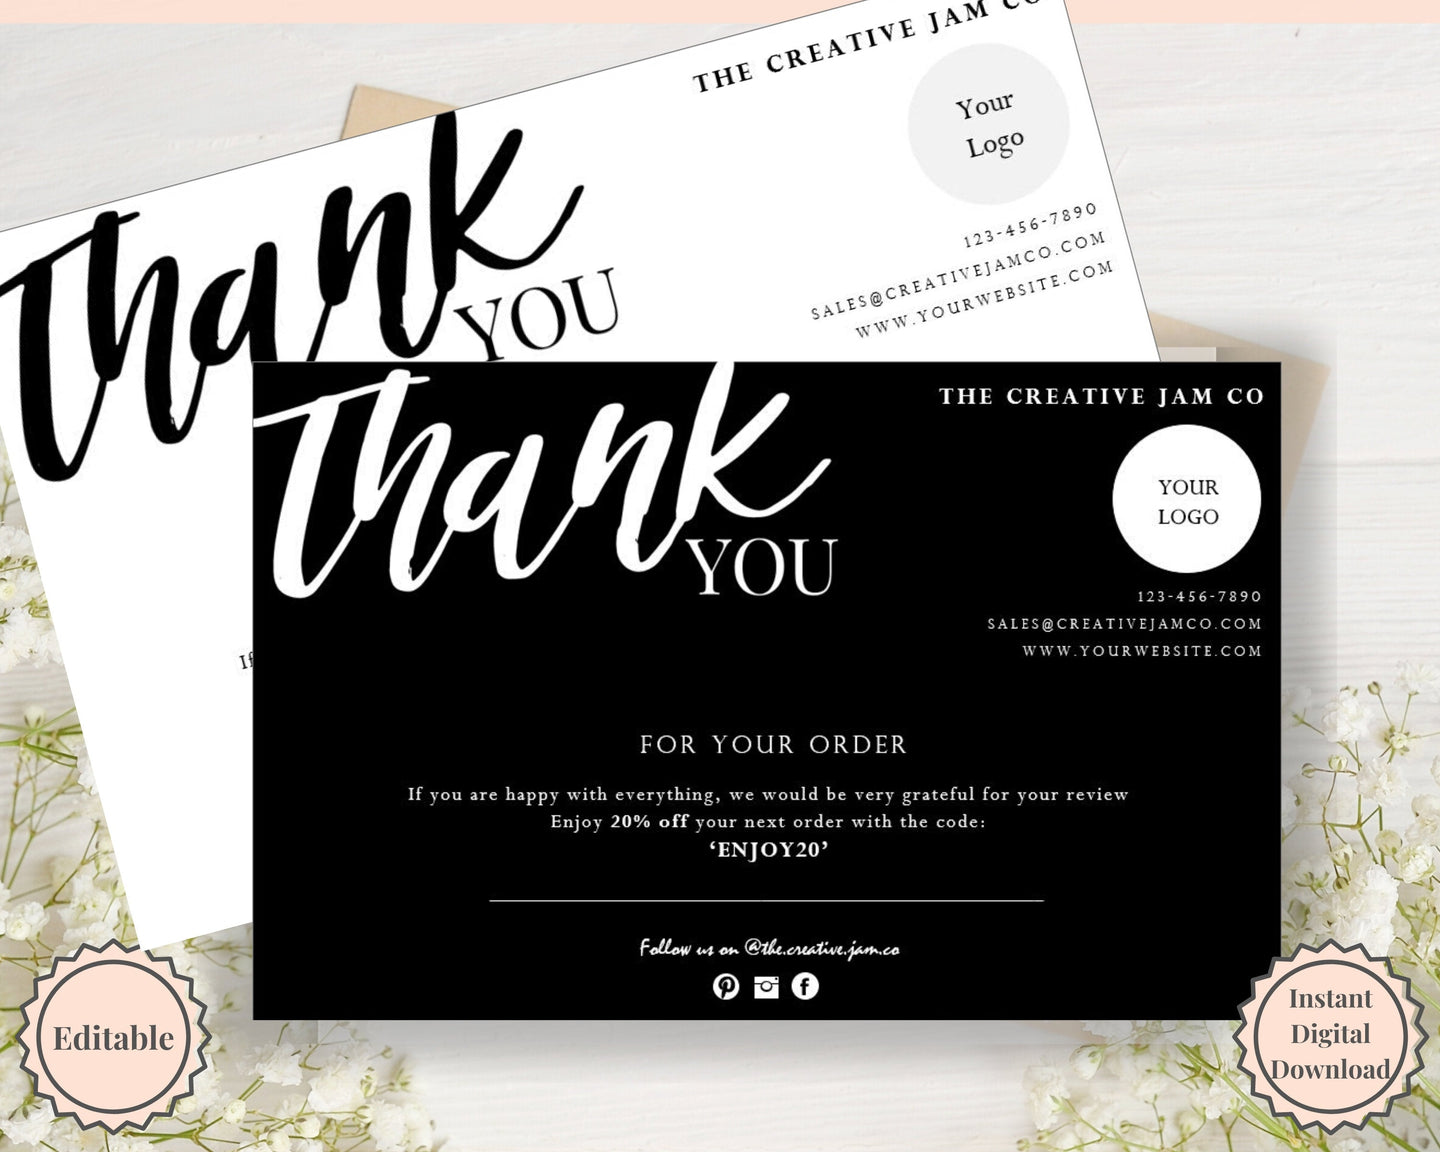 Business Thank You For Your Order Insert Card Template. EDITABLE Parcel Insert, Etsy Order, Small Online Business Purchase | Black & White